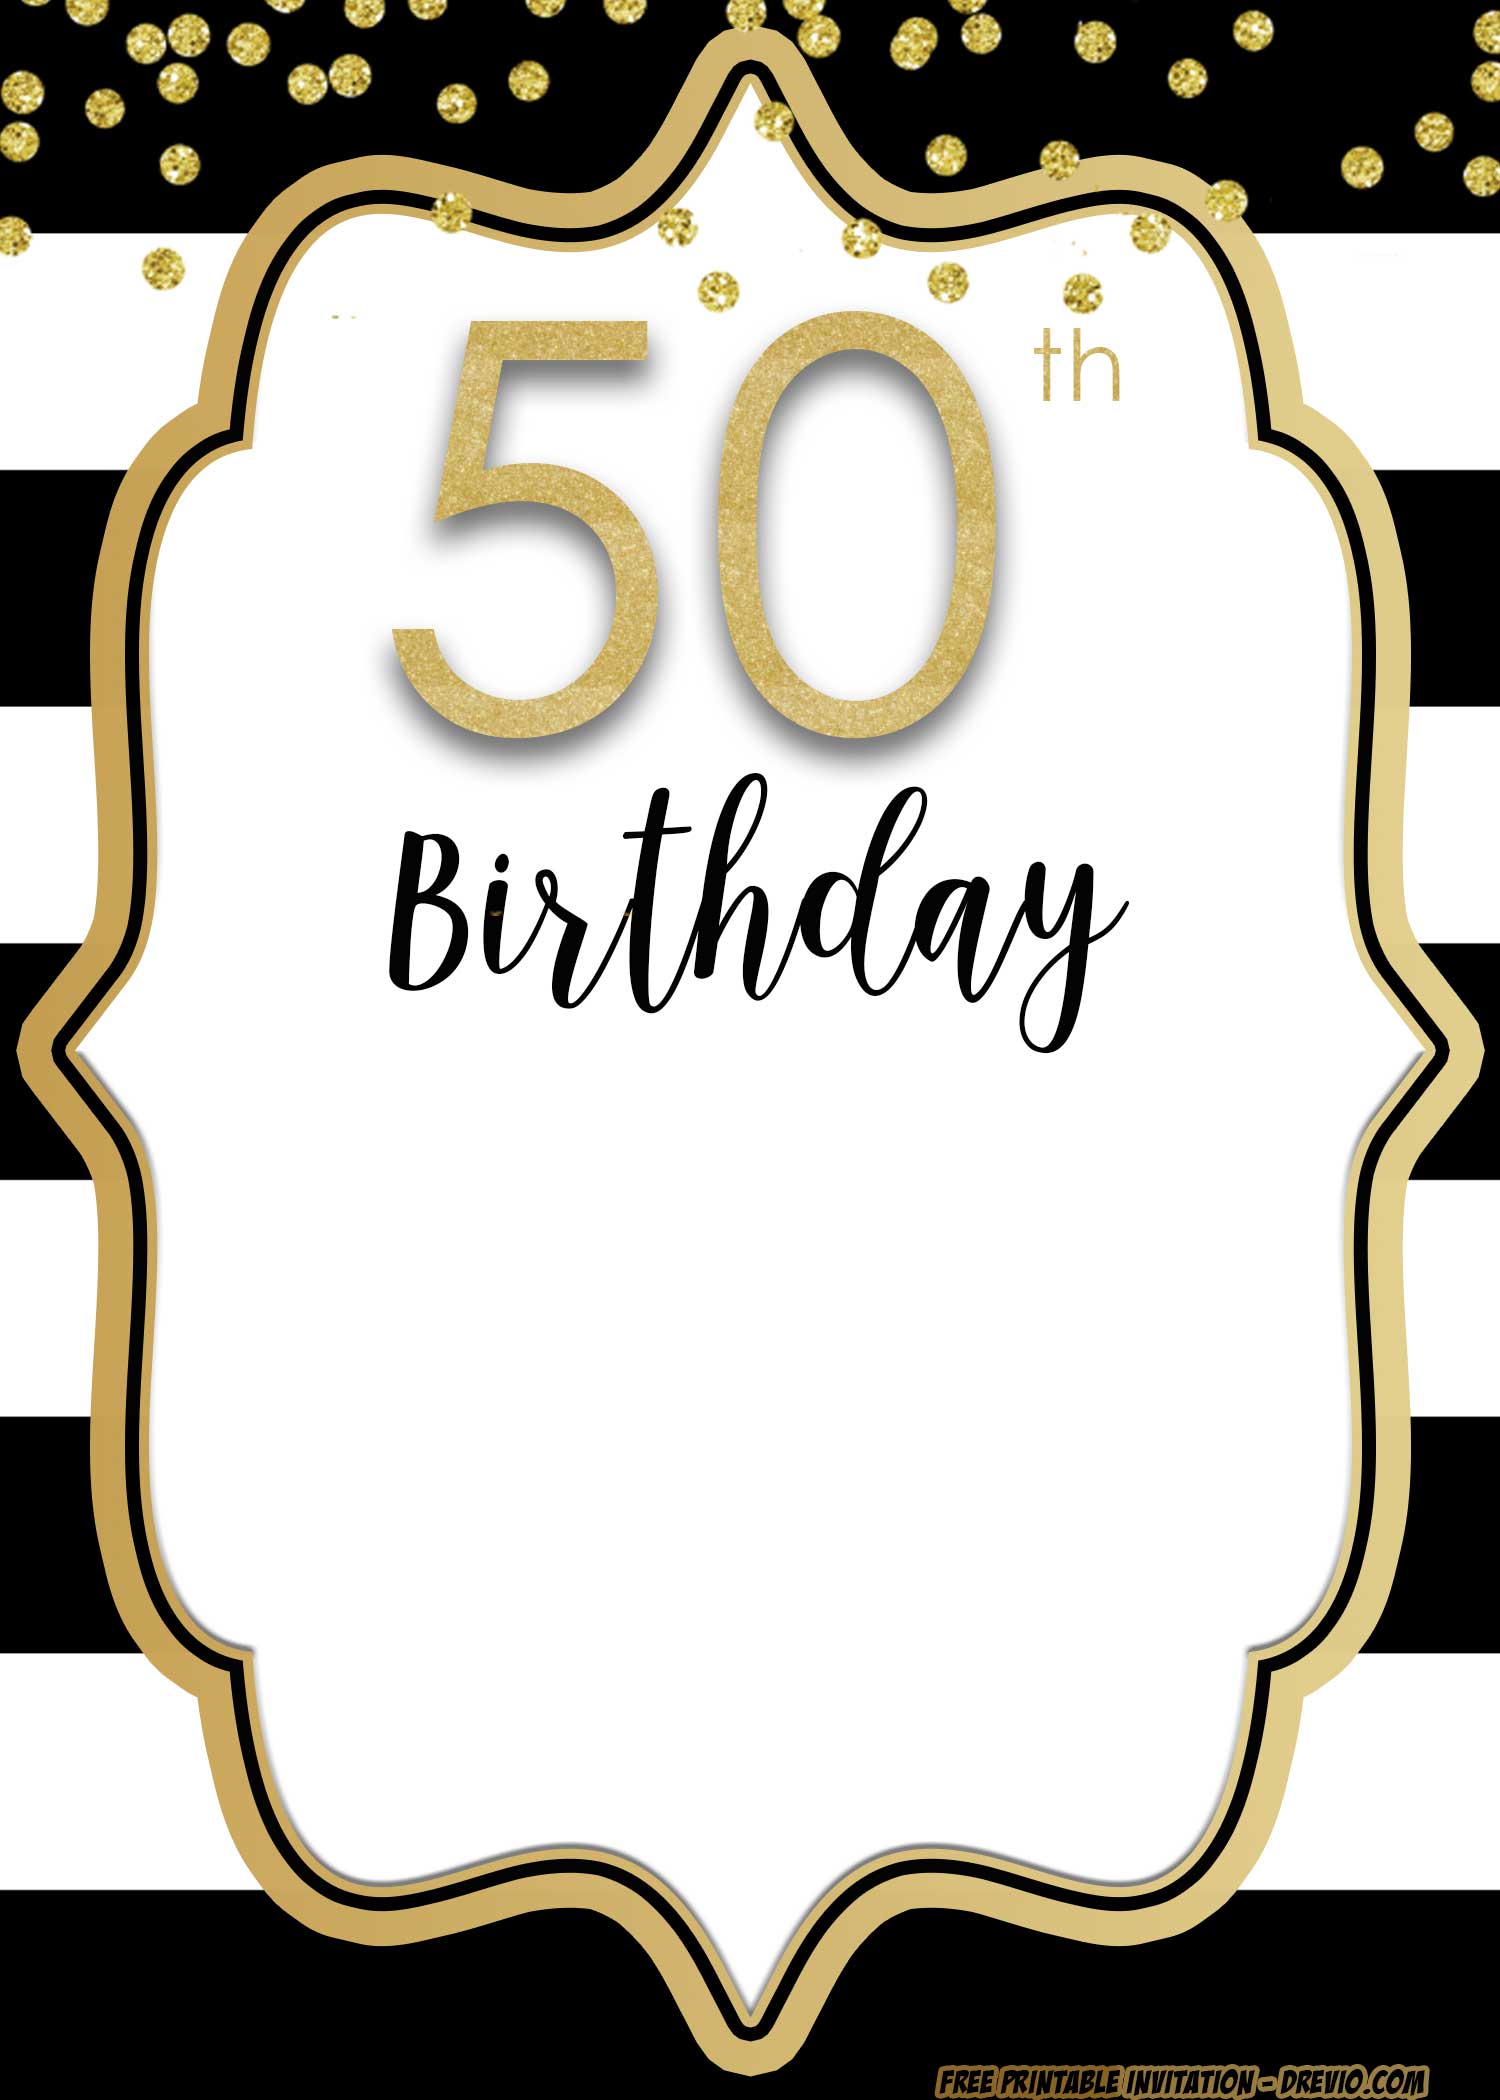 Adult Birthday Invitations Template for 50th years old and up! DREVIO